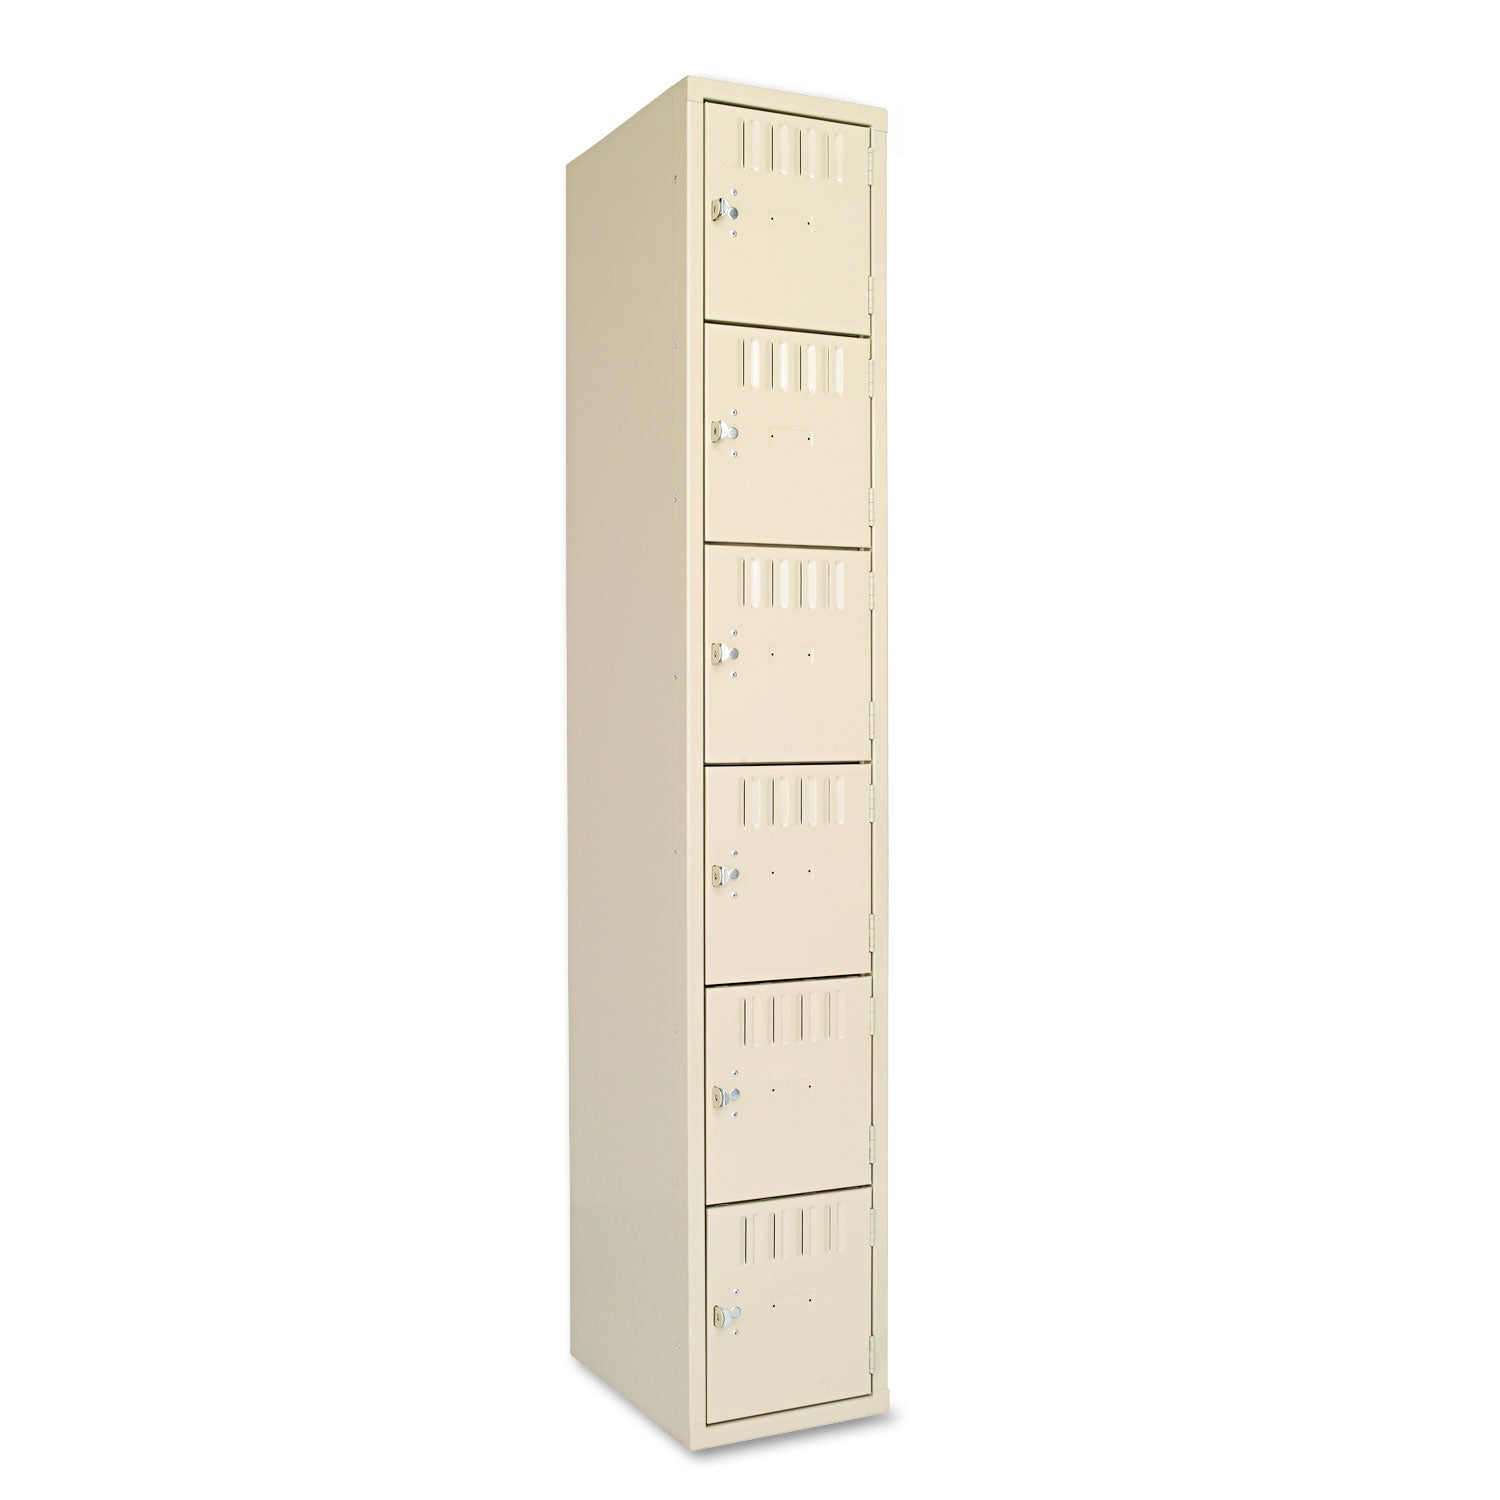 Box Compartments, Single Stack, 12w x 18d x 72h, Sand - 